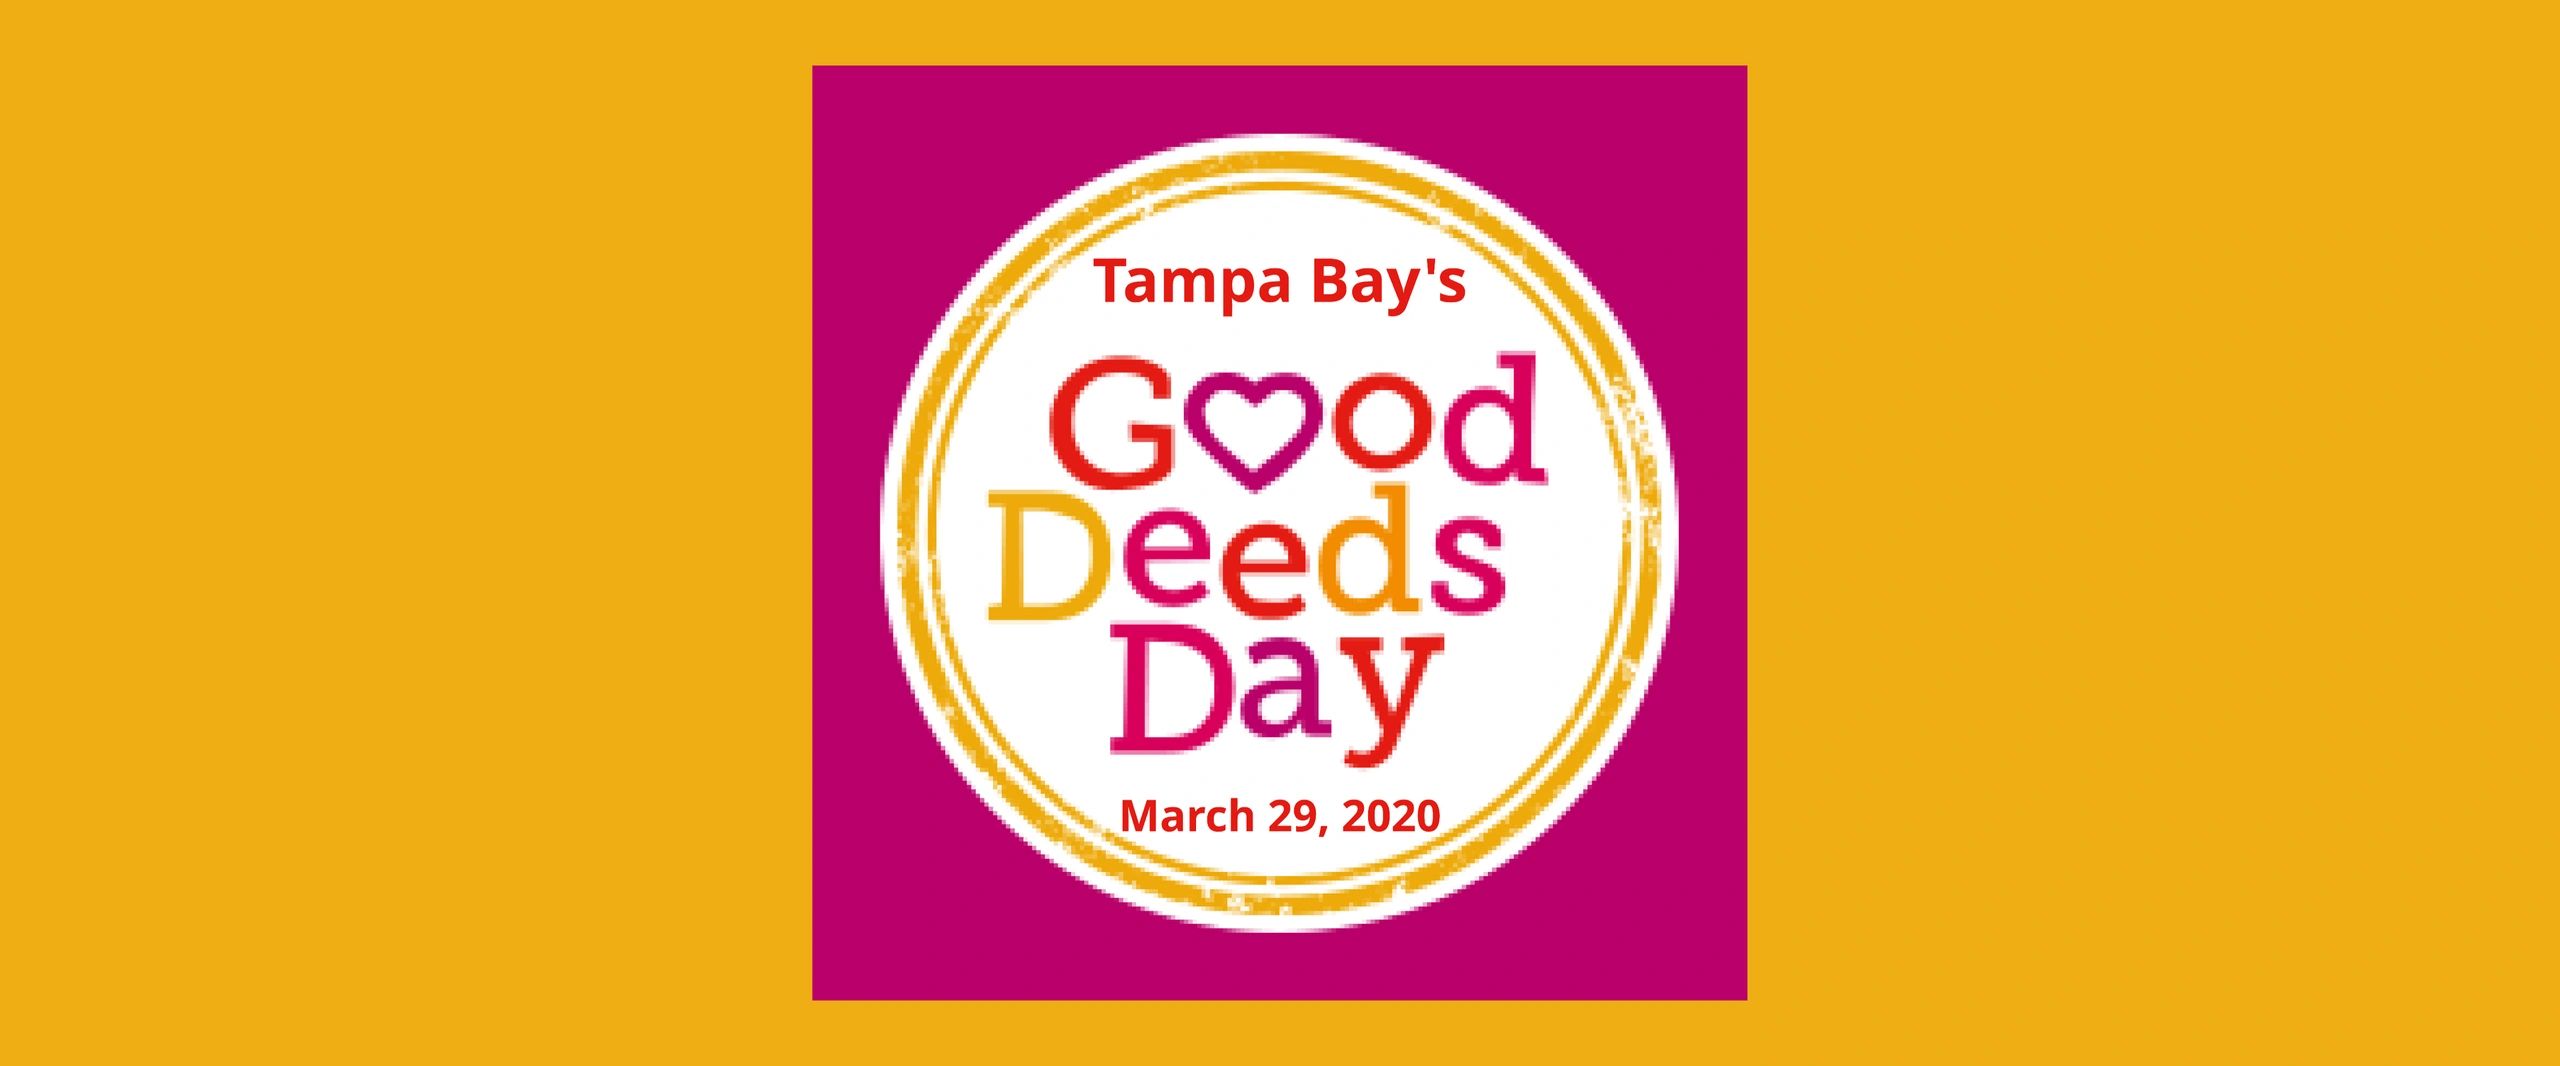 Tampa Bay's Good Deeds Day Festival